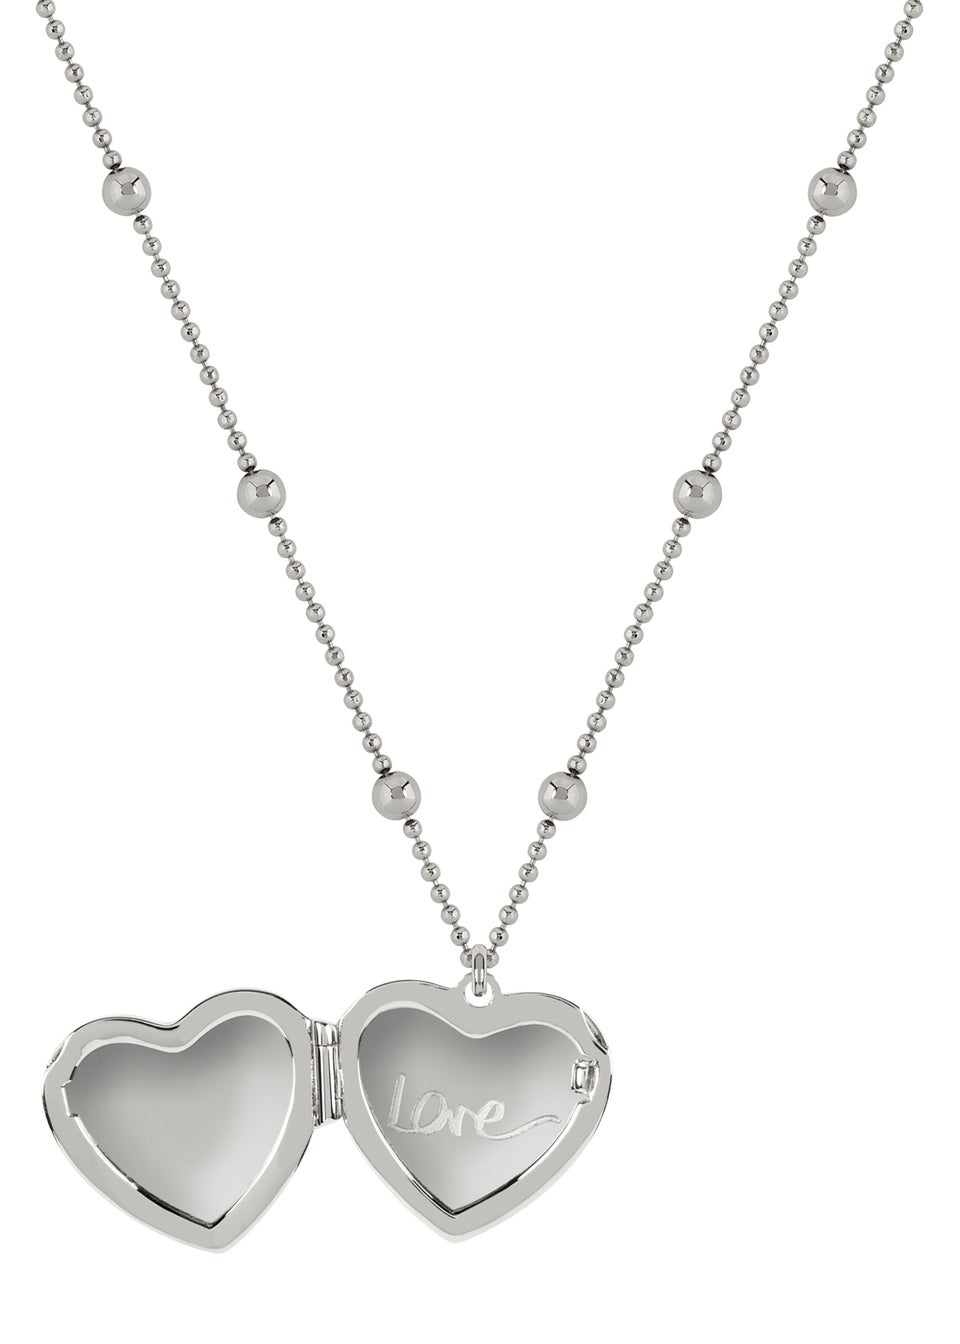 Radley London Silver Plated Bobble Chain Heart Locket Necklace